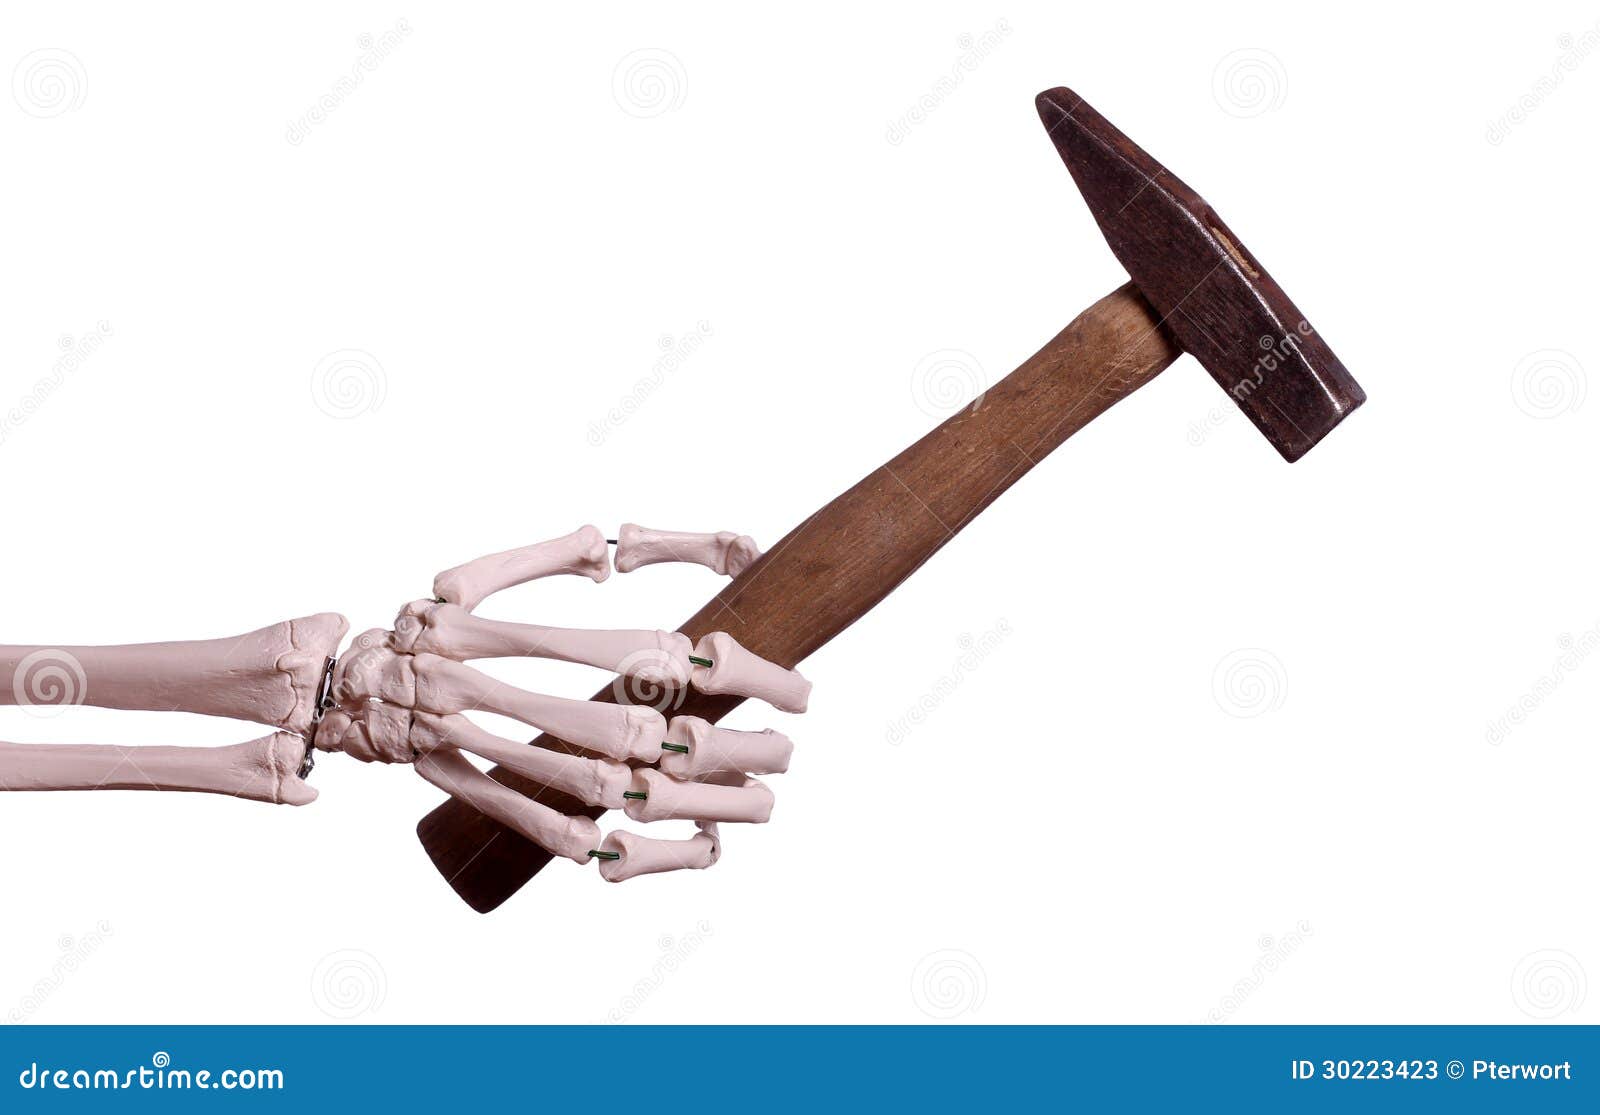 Skeleton Hand With Old Hammer Stock Photos - Image: 30223423